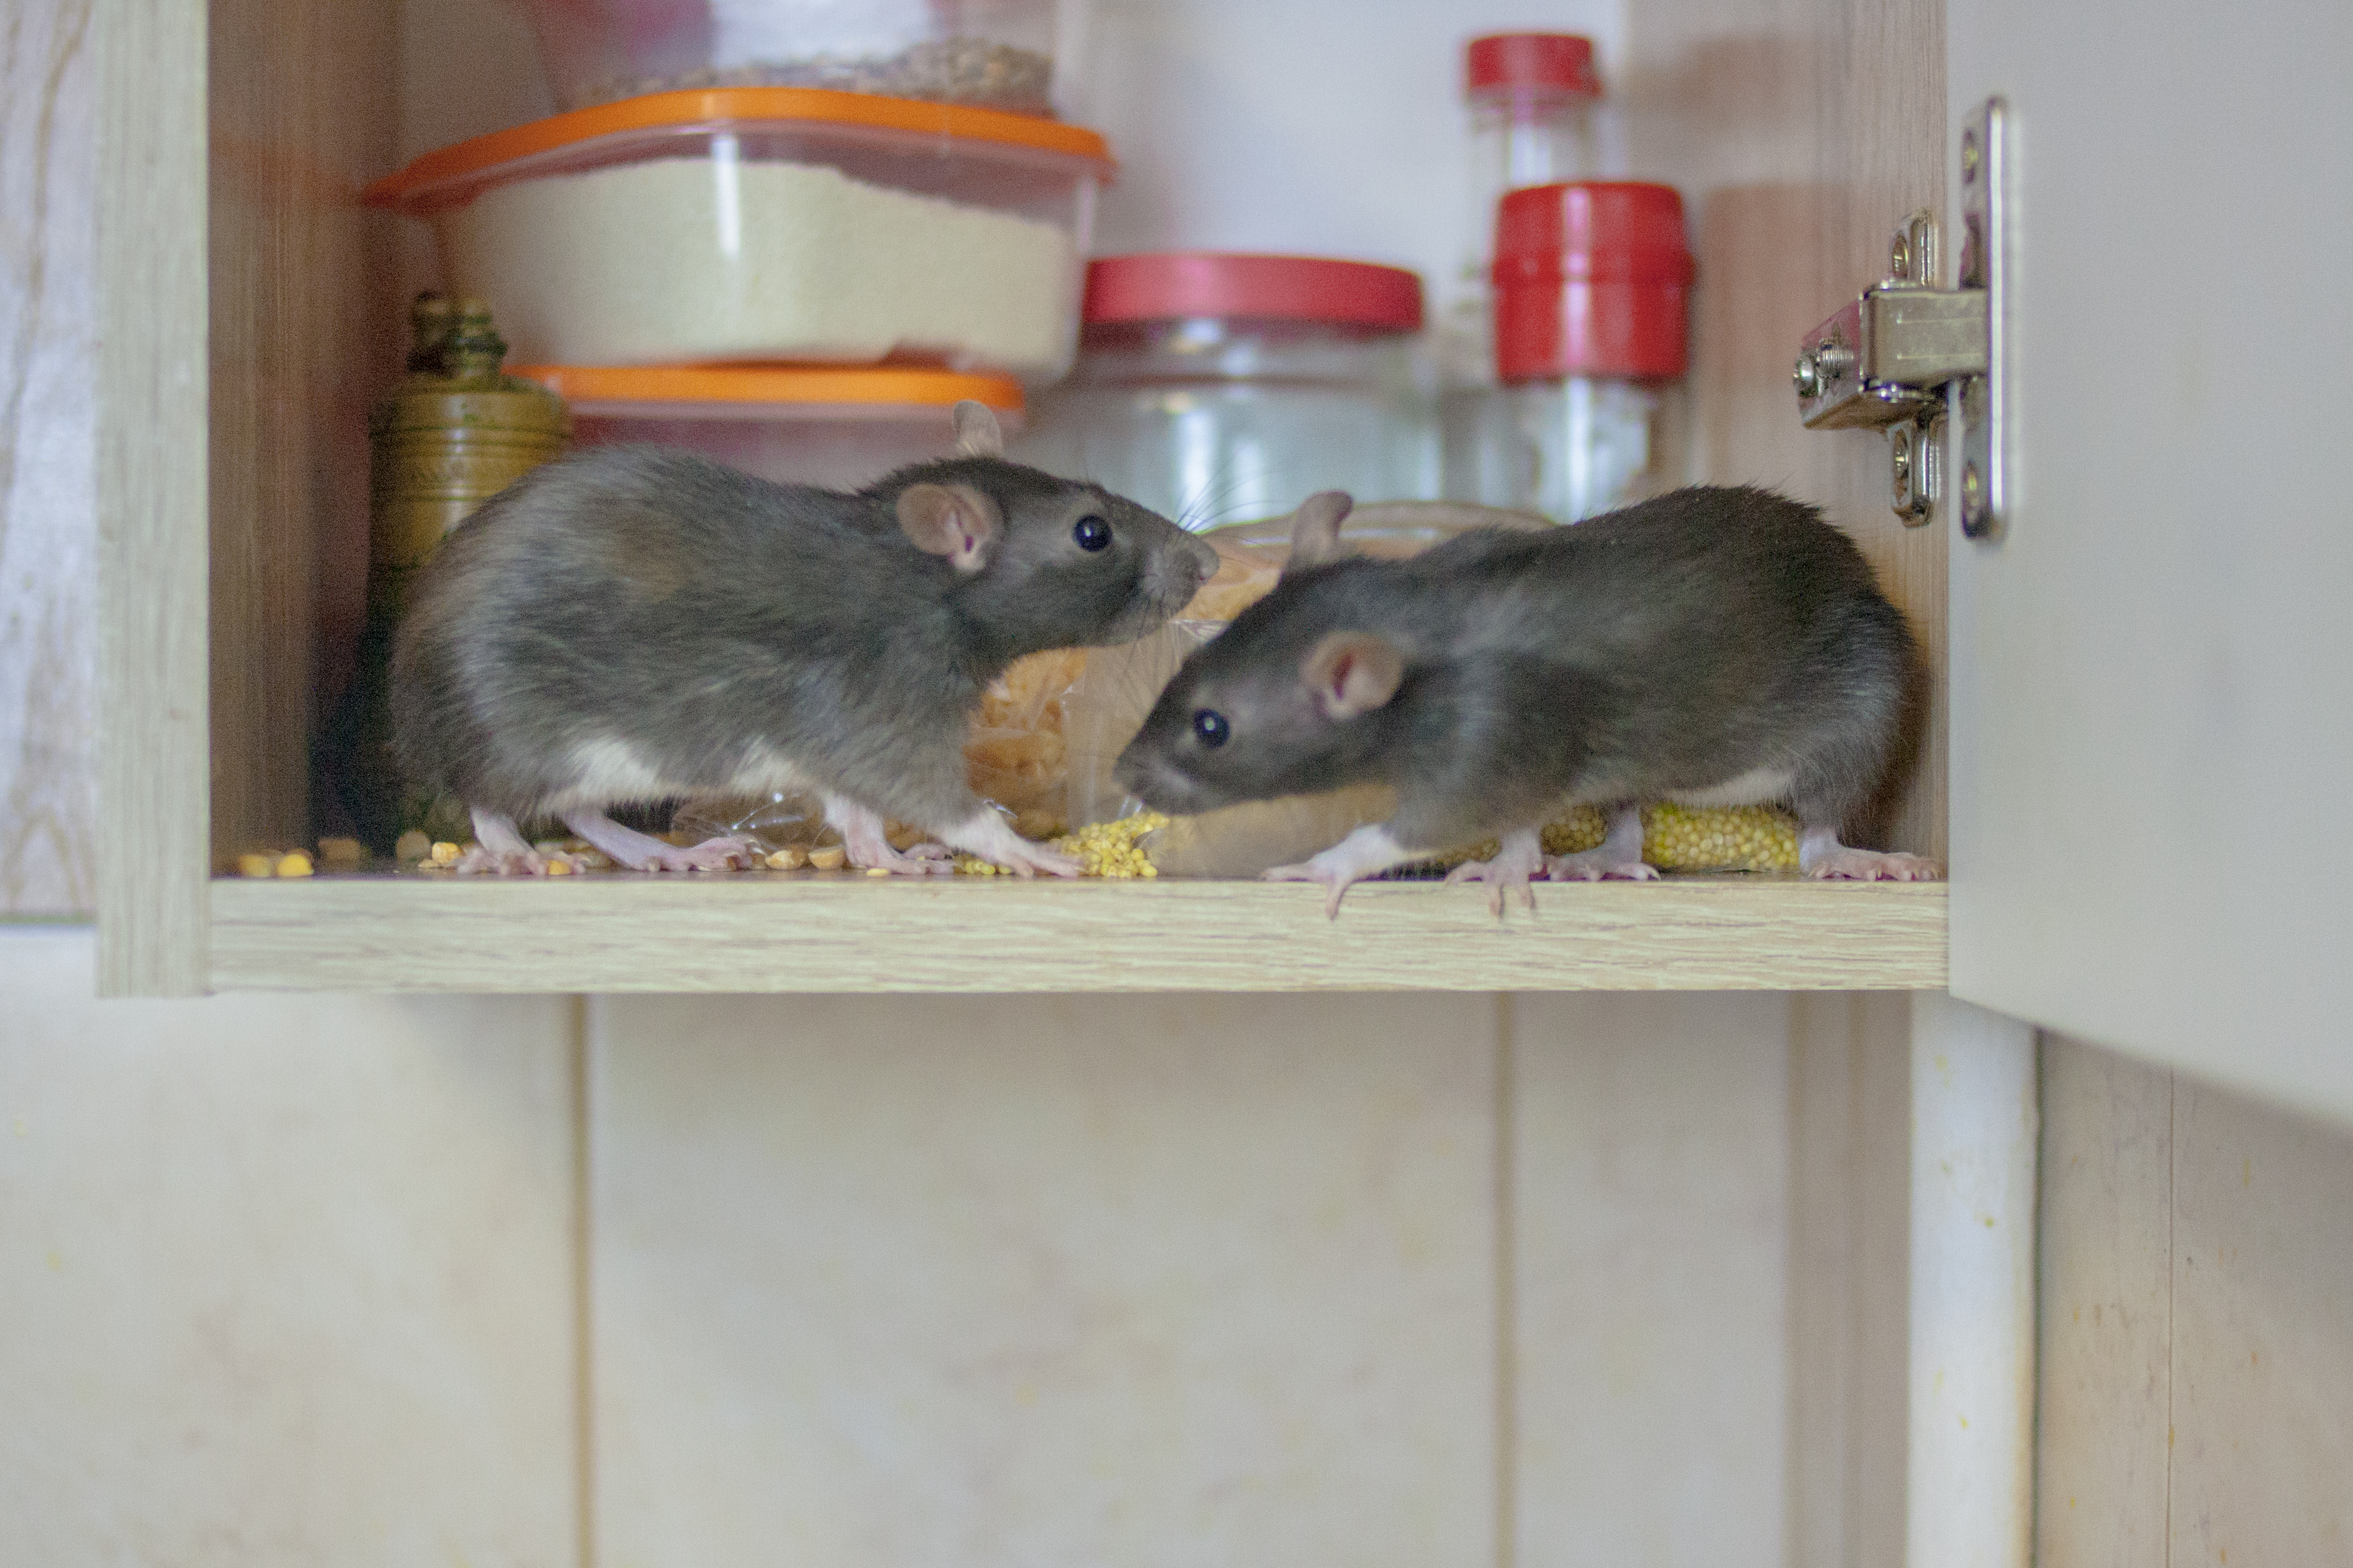 Two mice in cupboard with food containers in the background and crumbs in cabinet